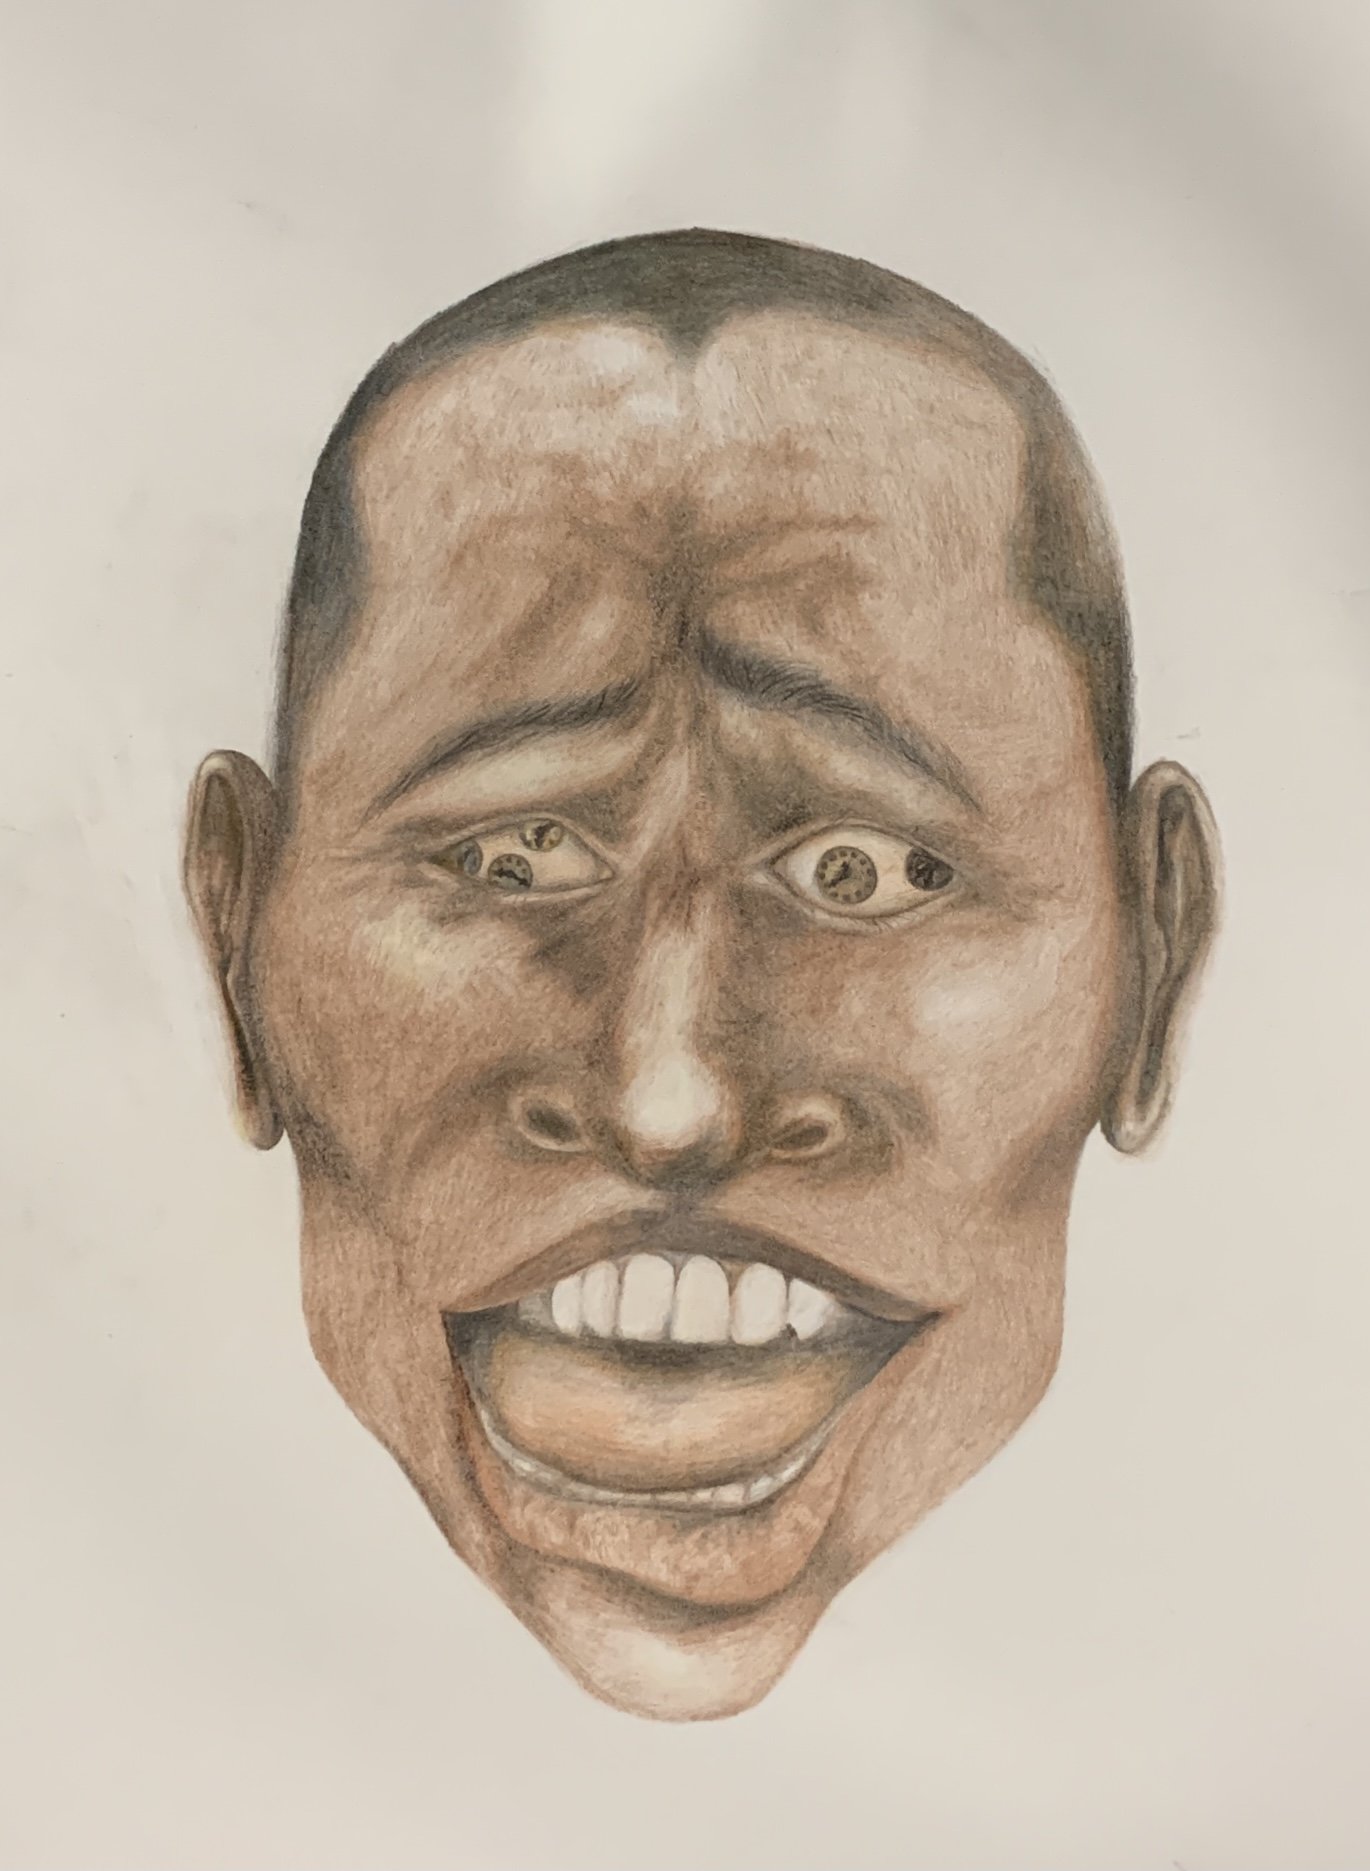 An illustration of a man's face with clocks in his eyes